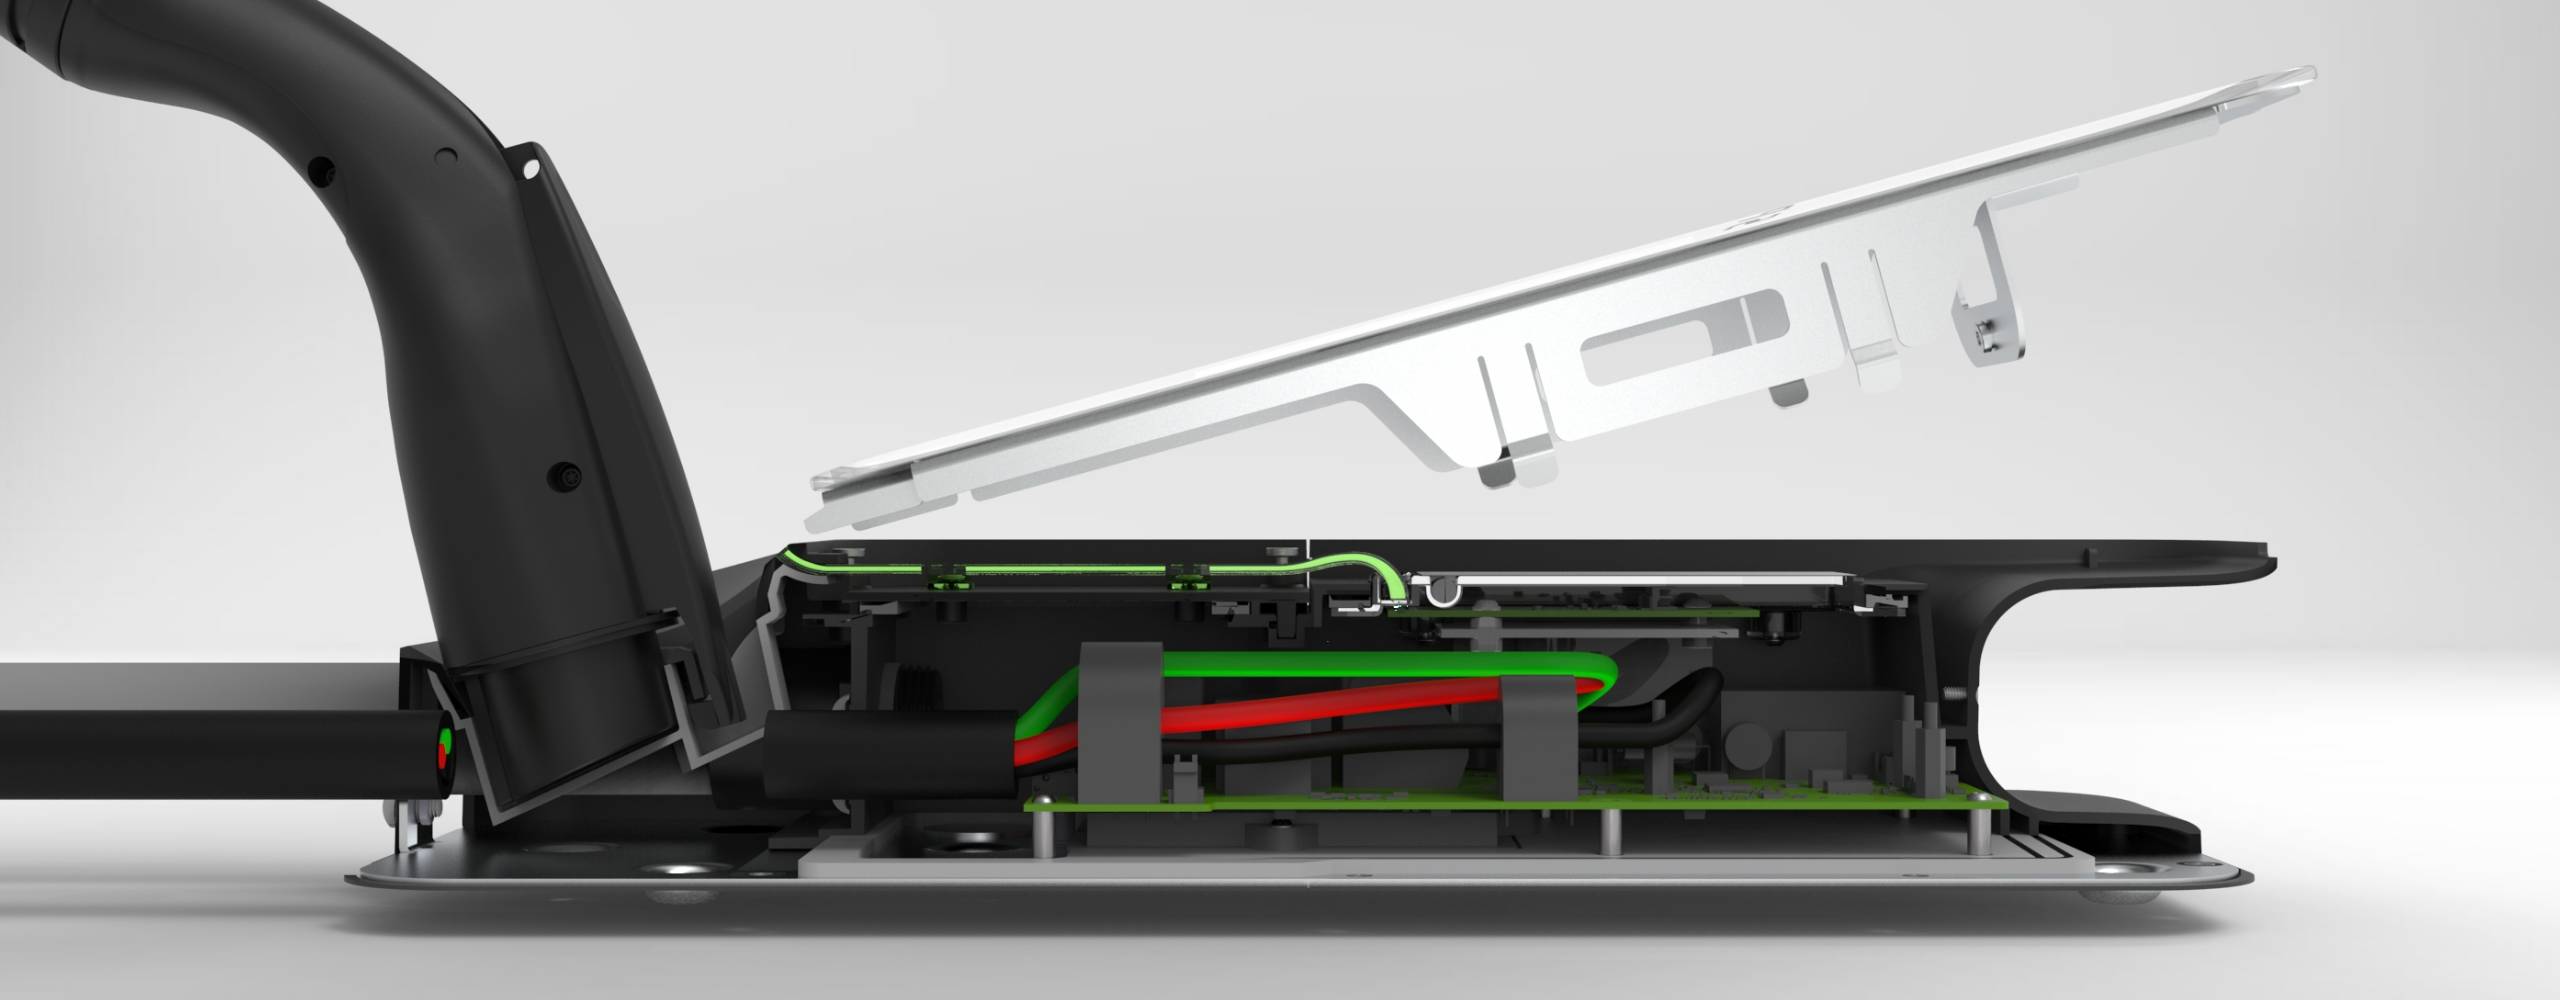 A rendering of the span drive cut in half. Highlighting the inner mechanics and wiring in red and green.